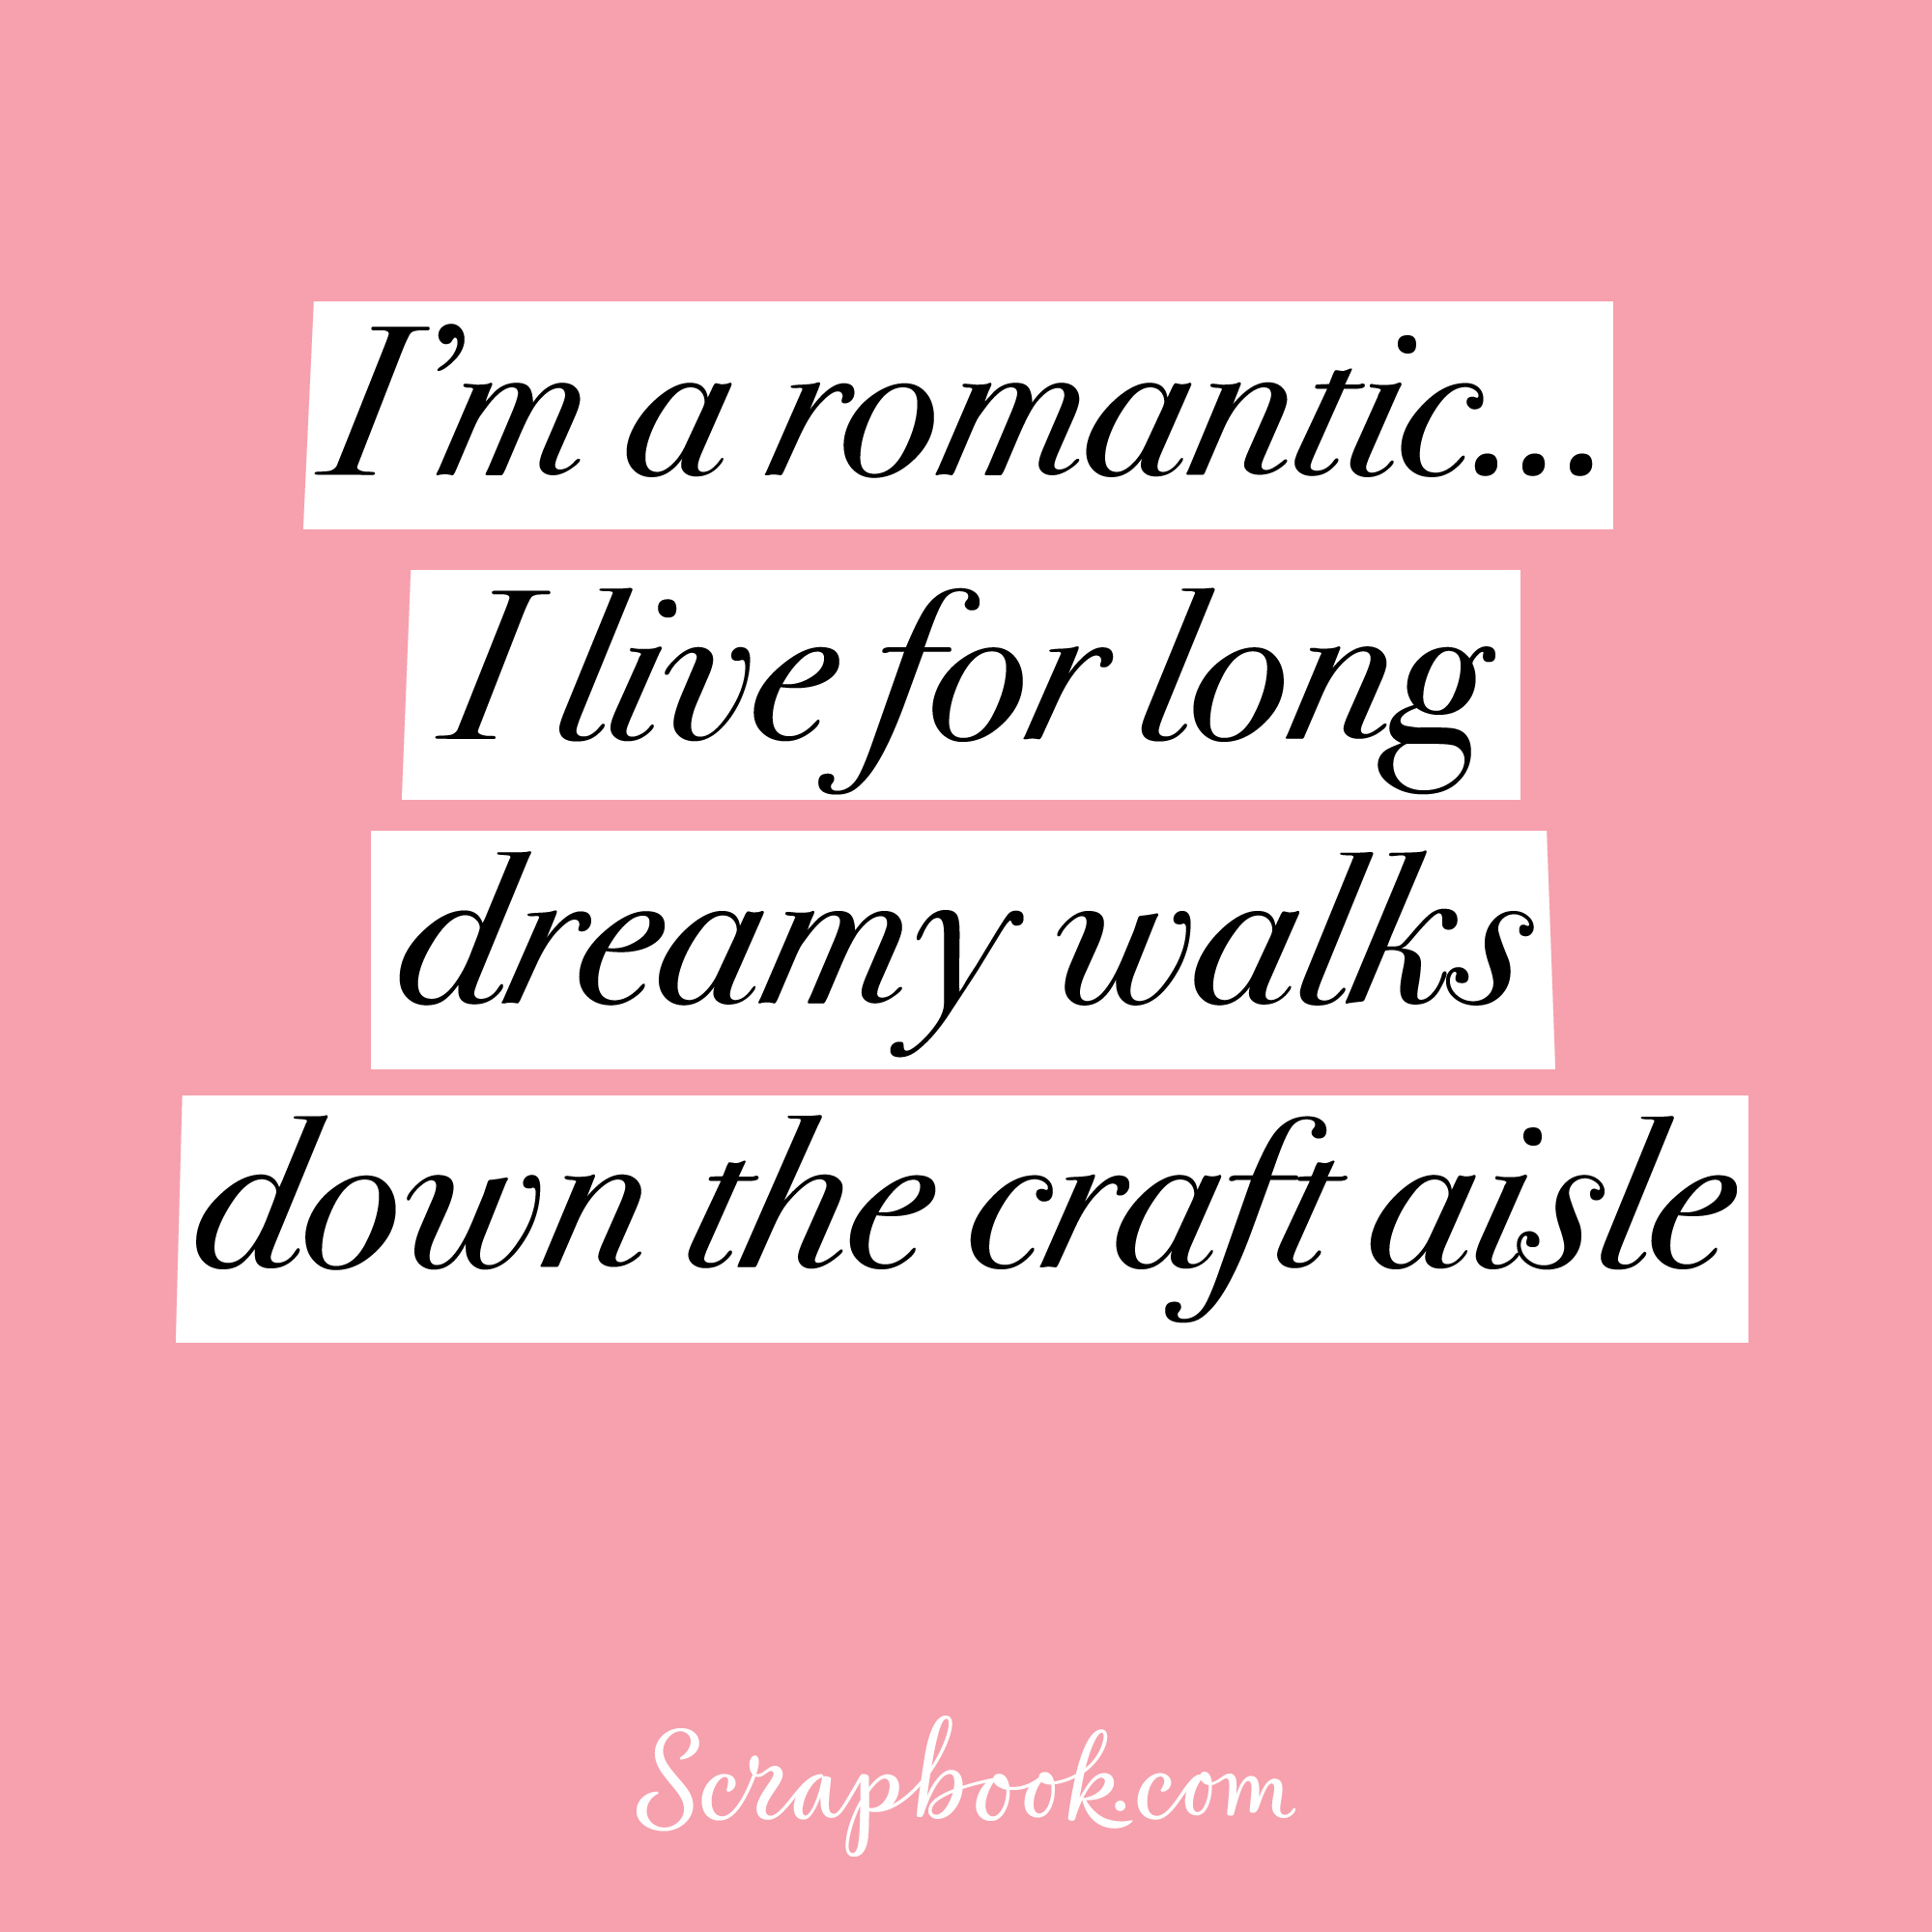 I'm a romantic... I live for long, dreamy walks down the craft aisle